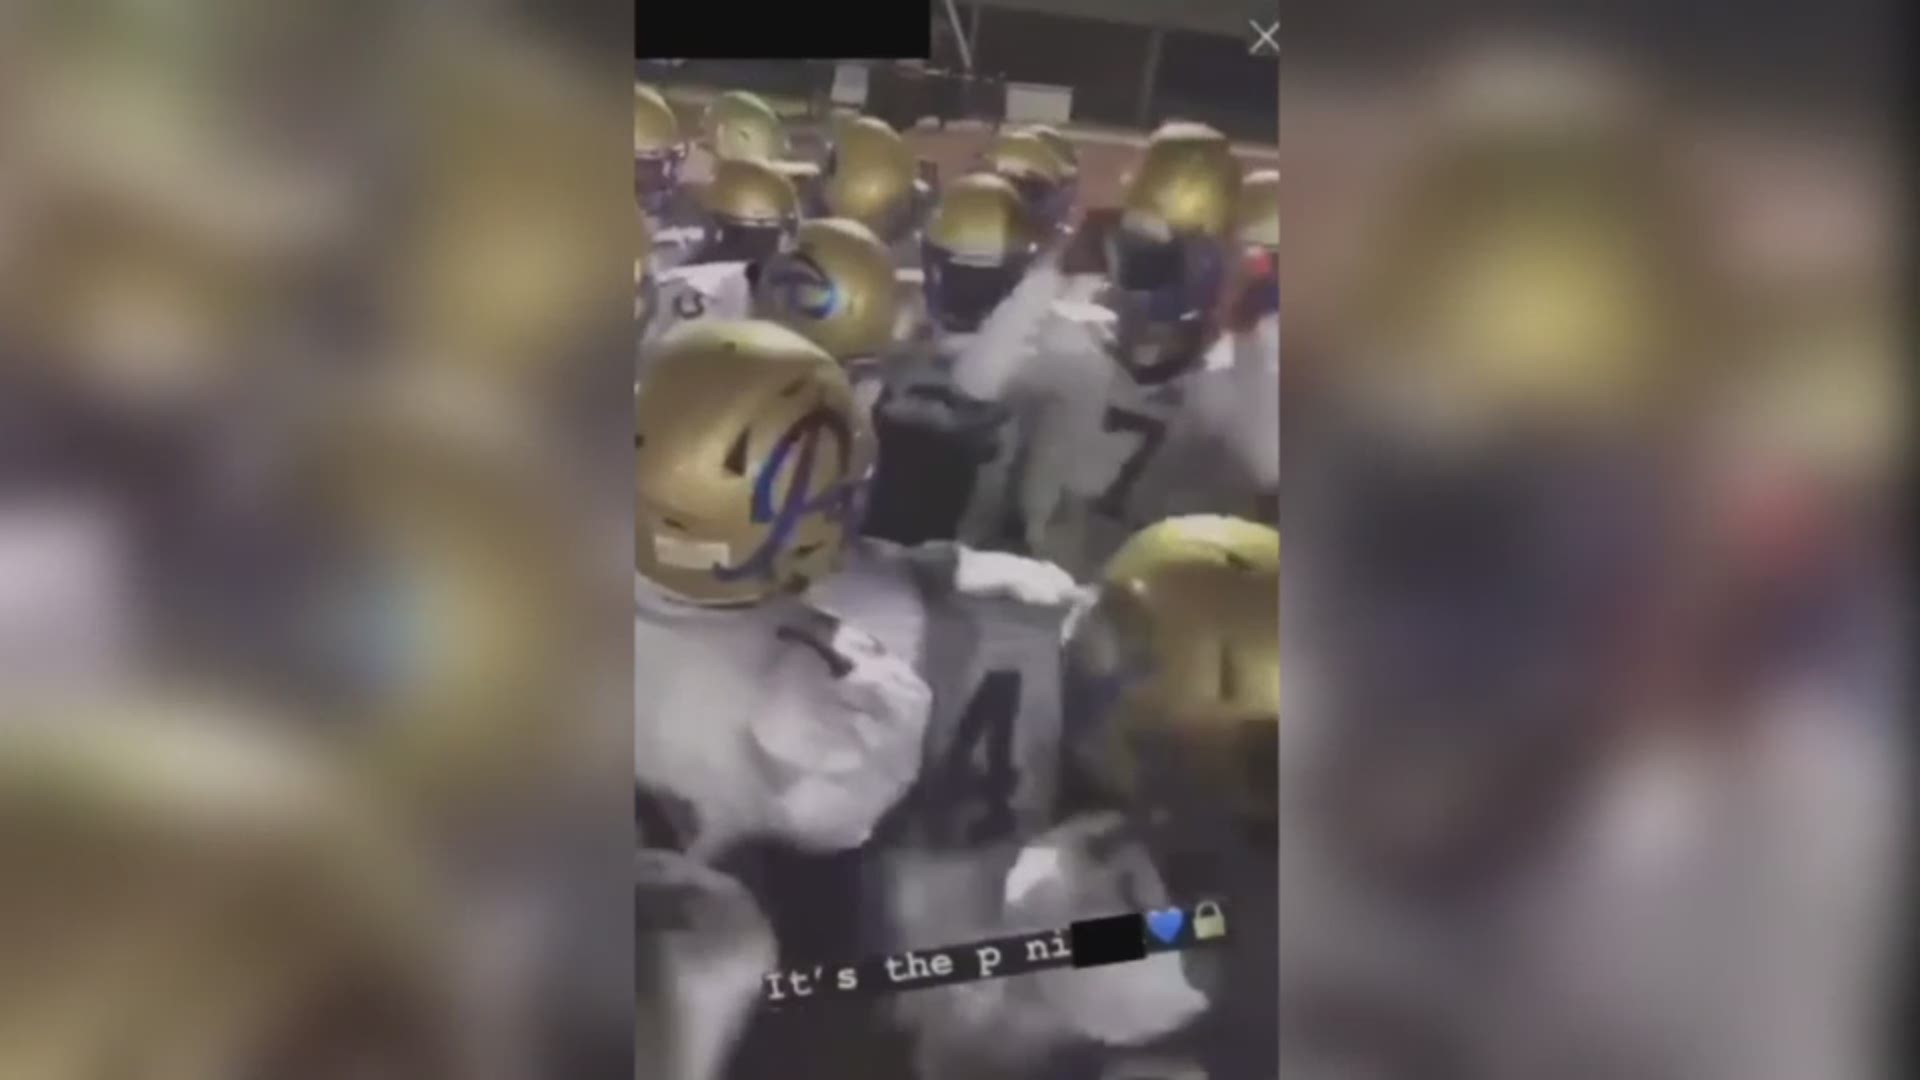 Video on social media shows Phoebus High School's football team chanting the "N" word. Hampton City Schools said appropriate steps were being taken to address it.